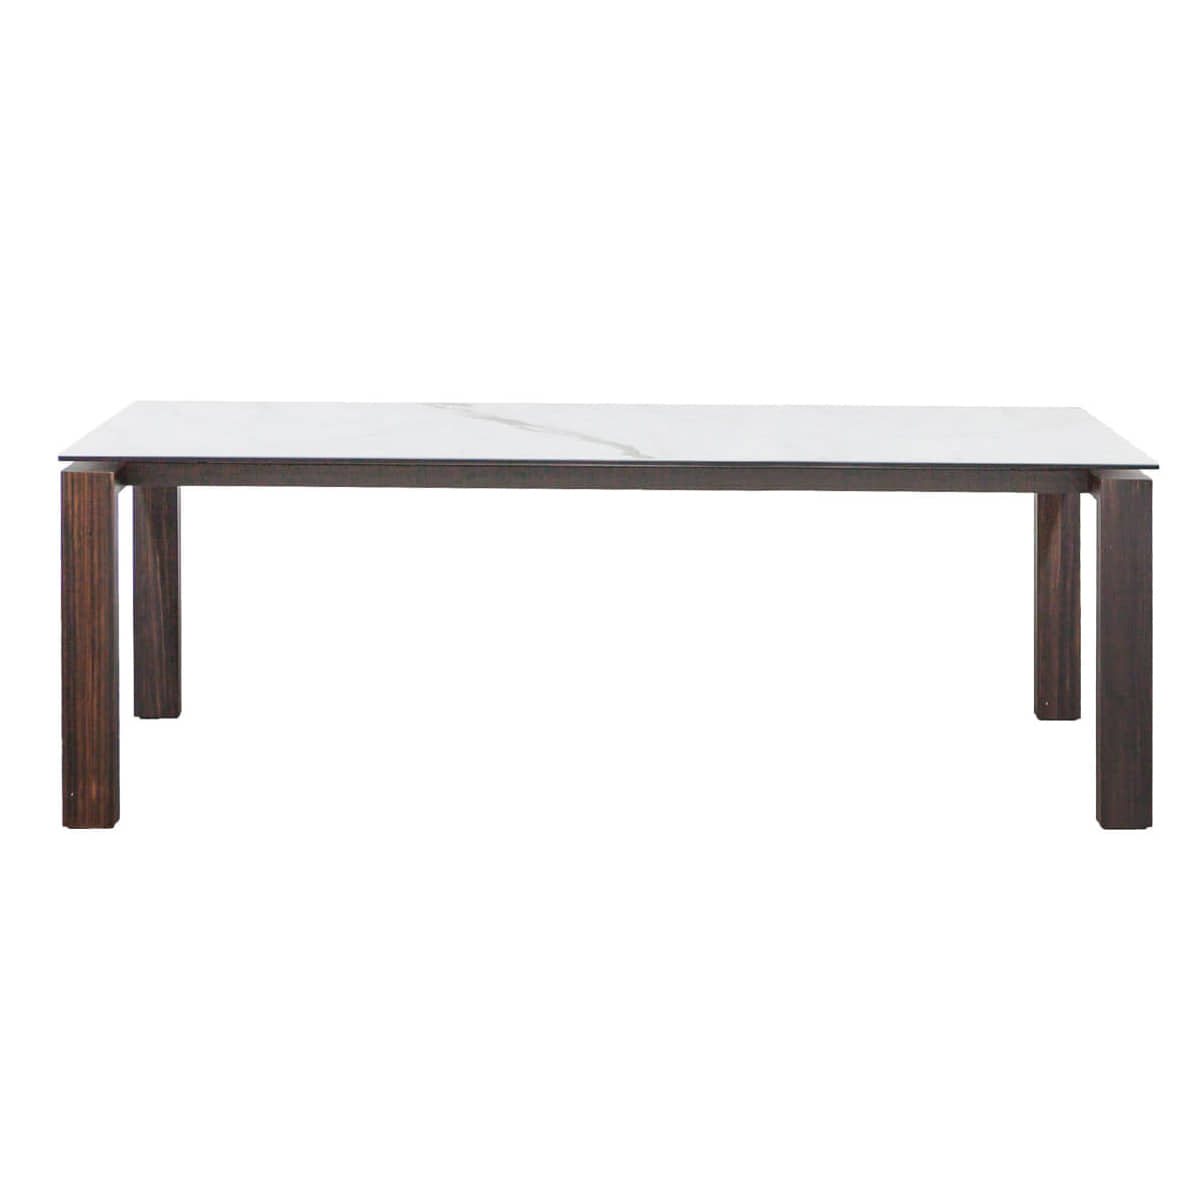 ITALSTUDIO Neptuns Dining Table  넵튠 식탁 - 220DESIGNED BY ITALY